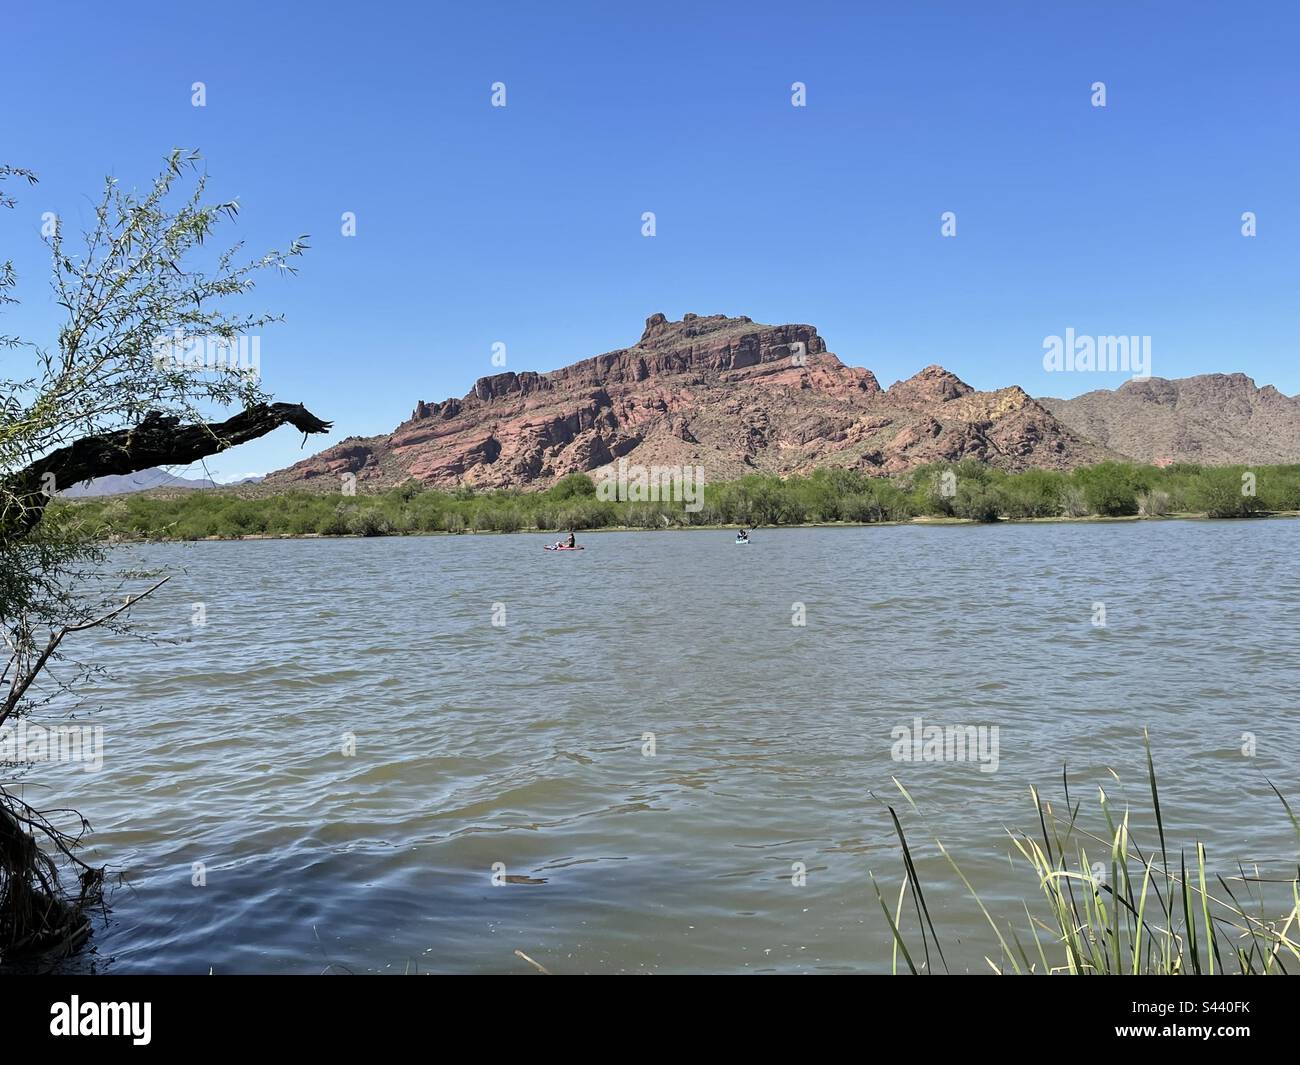 Red Mountain, Salt River, brilliant blue sky, paddle boarders, cattails, Bush Highway, Arizona, Tonto National Forest, Mesa, Fountain Hills Stock Photo